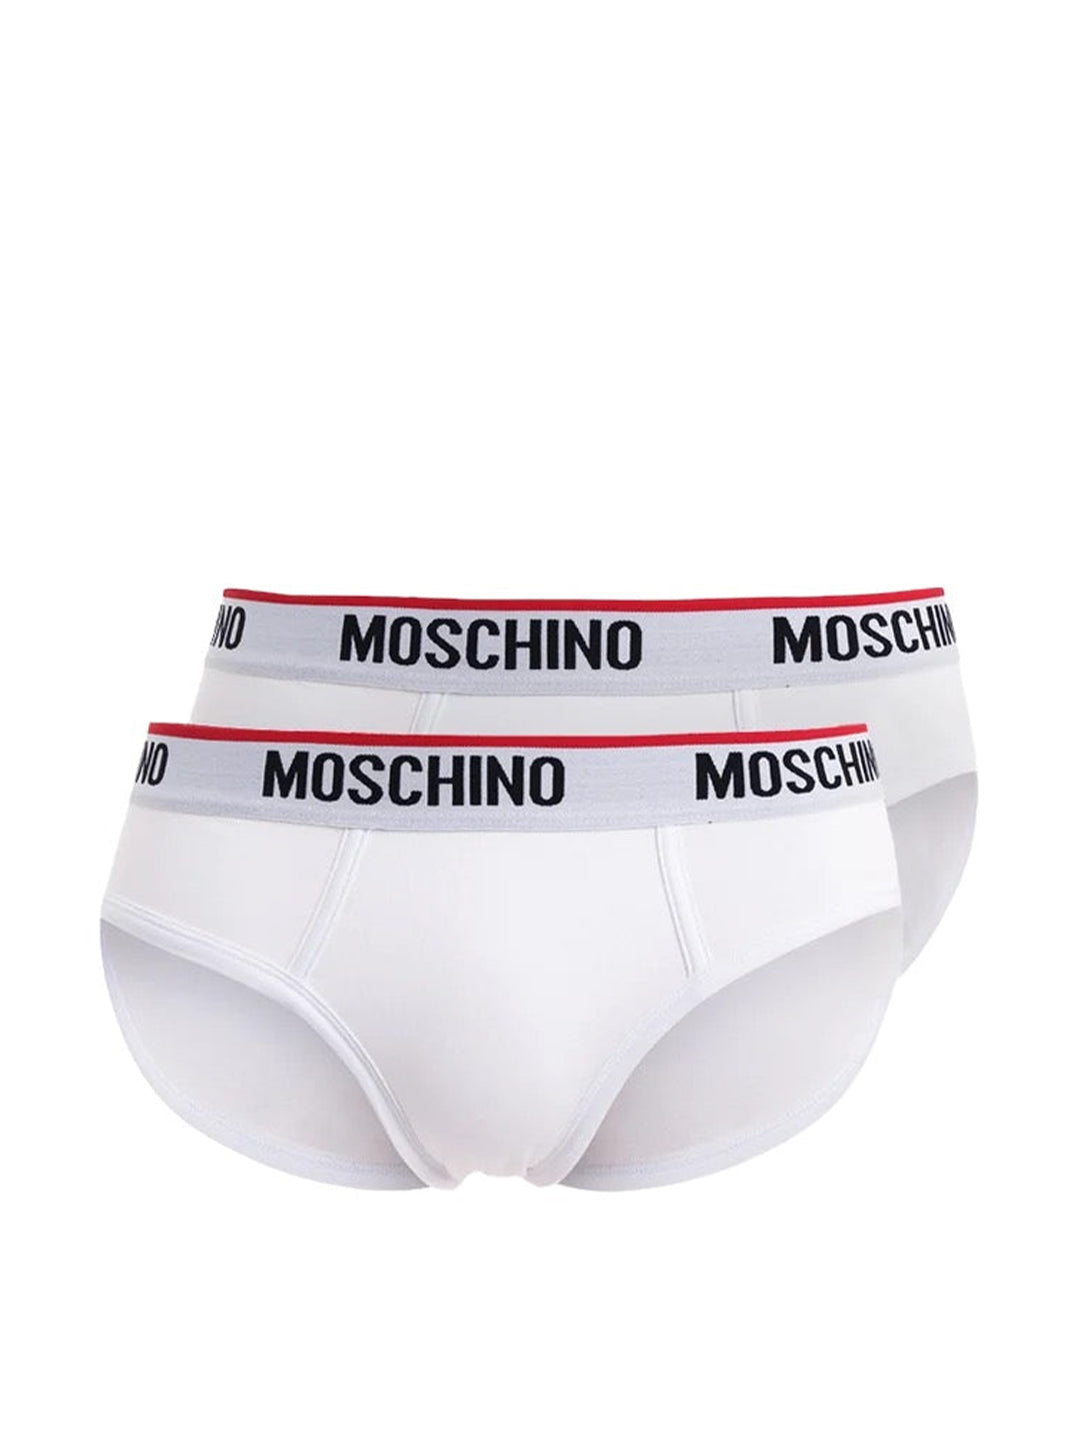 Moschino white briefs set in bipack packaging